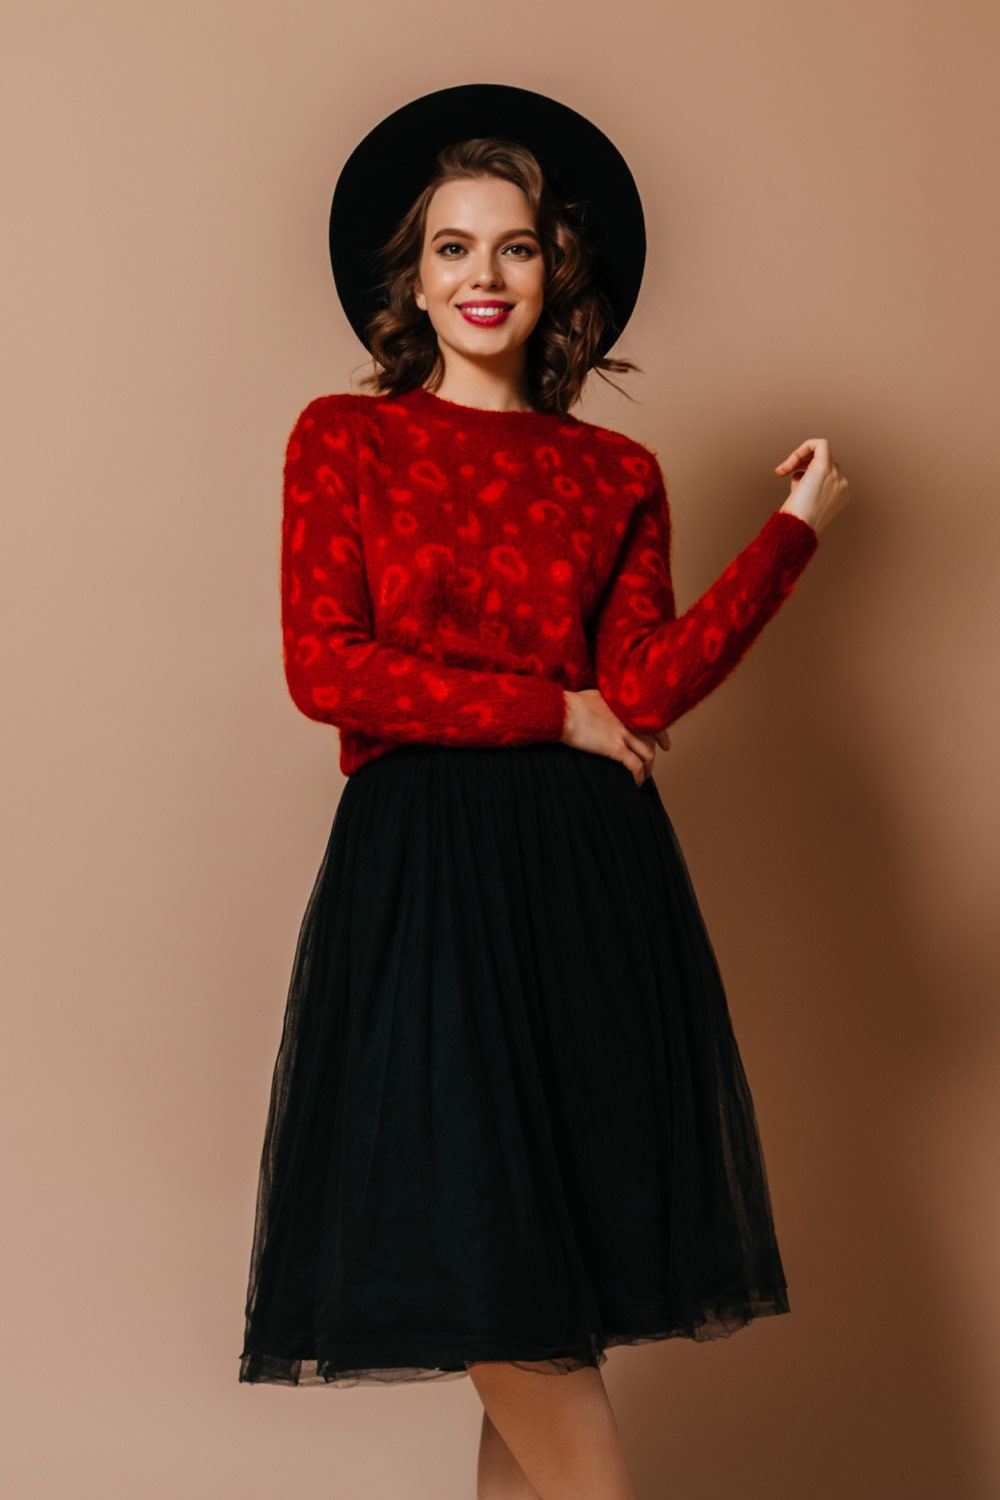 Cute Valentines Day Outfits with Black Dress and Red Sweater